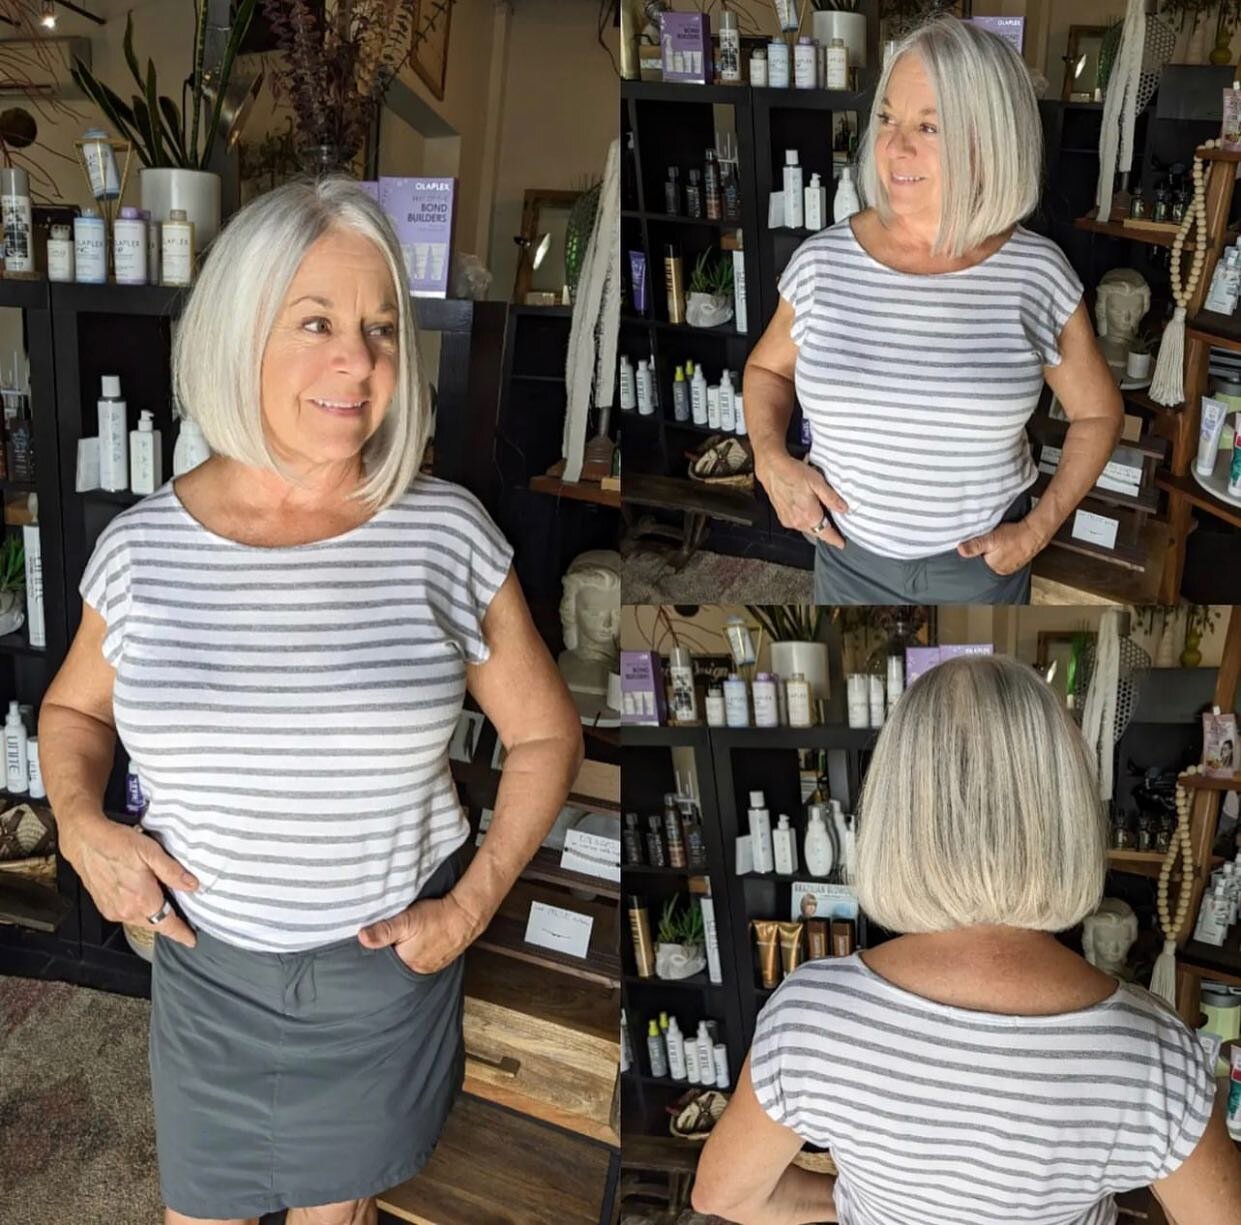 One of my all time favorite transitions. 
Although I do miss coloring her hair, I LOVE her natural silver. It took us awhile to get to her natural color, but I had full confidence she would love it and glow with confidence and radiance. 
Now I enjoy 